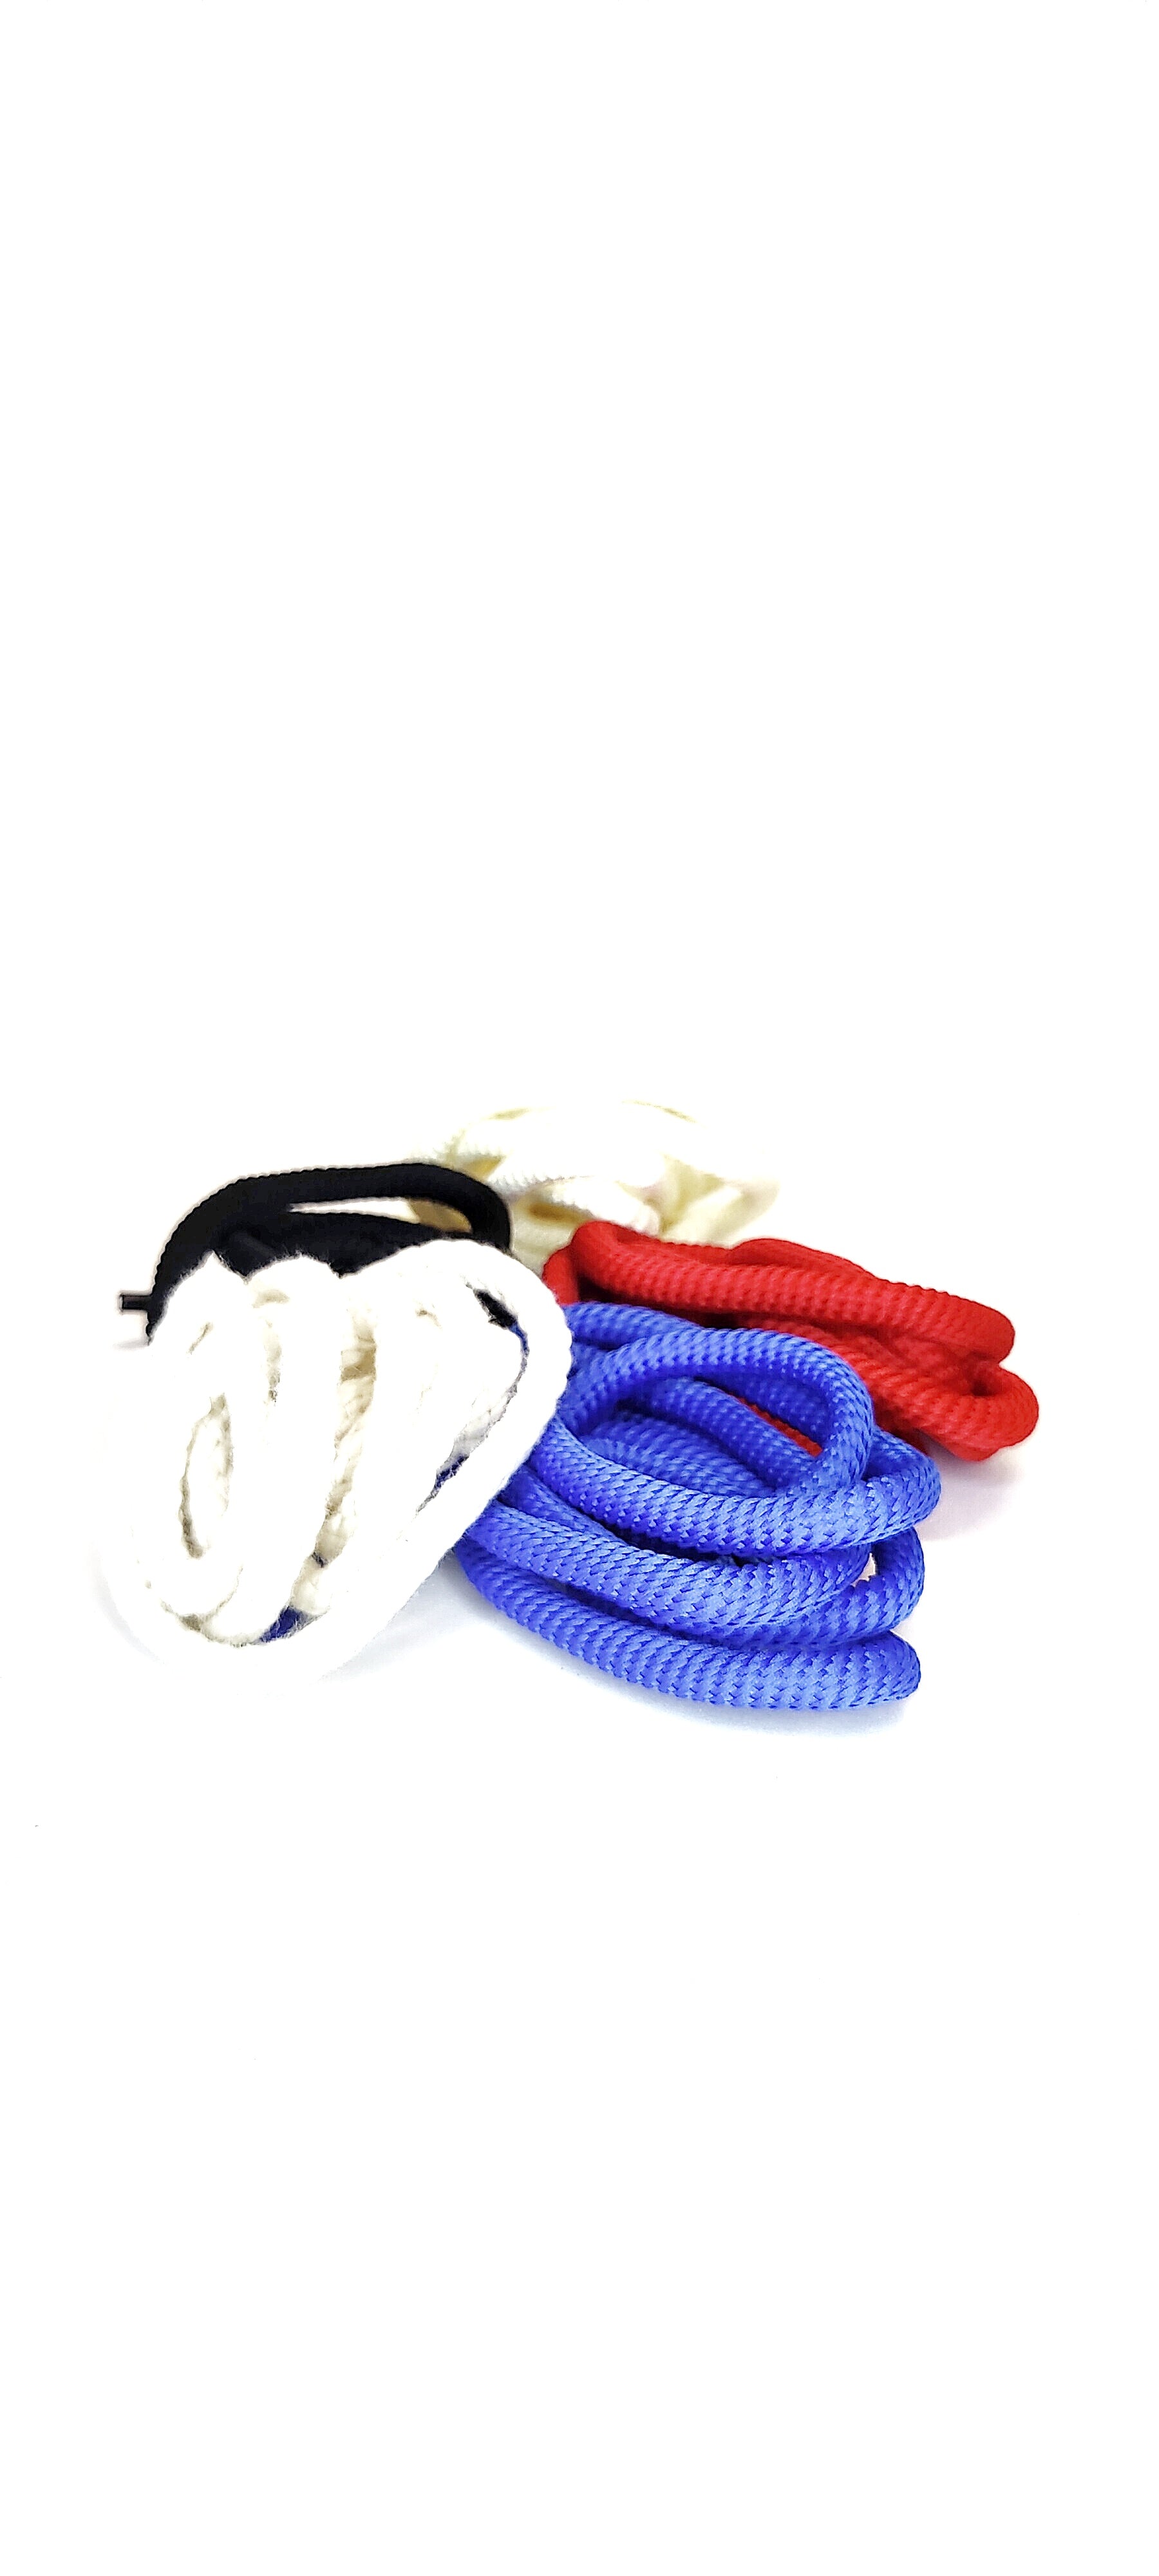 Ultimate Rope lace Combo Pack 5 pairs by Thegoodlace